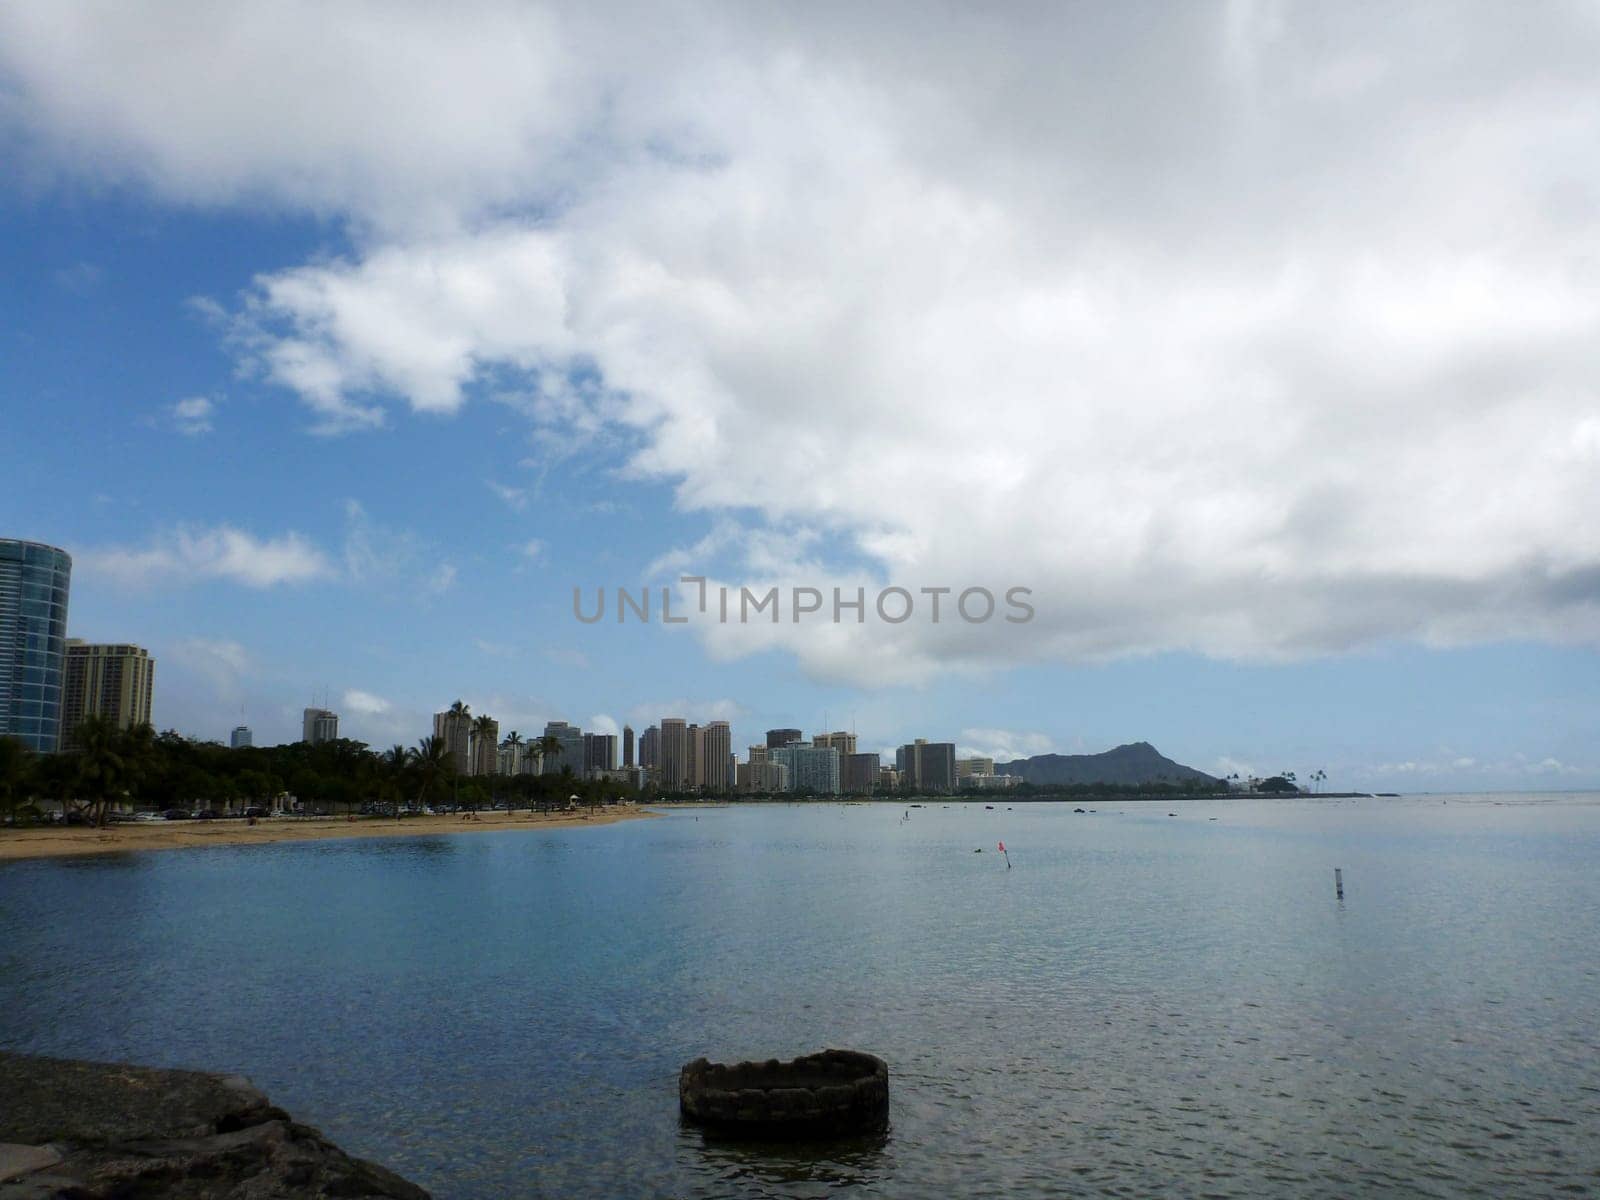 Stunning view of Honolulu’s skyline and the iconic Diamond Head crater from Ala Moana Beach Park, a popular recreational area in Hawaii. The photo was taken from the rock wall near Kewalo Basin, a harbor for fishing and recreational boats. The ocean is clear and blue, and the sky is partly cloudy.